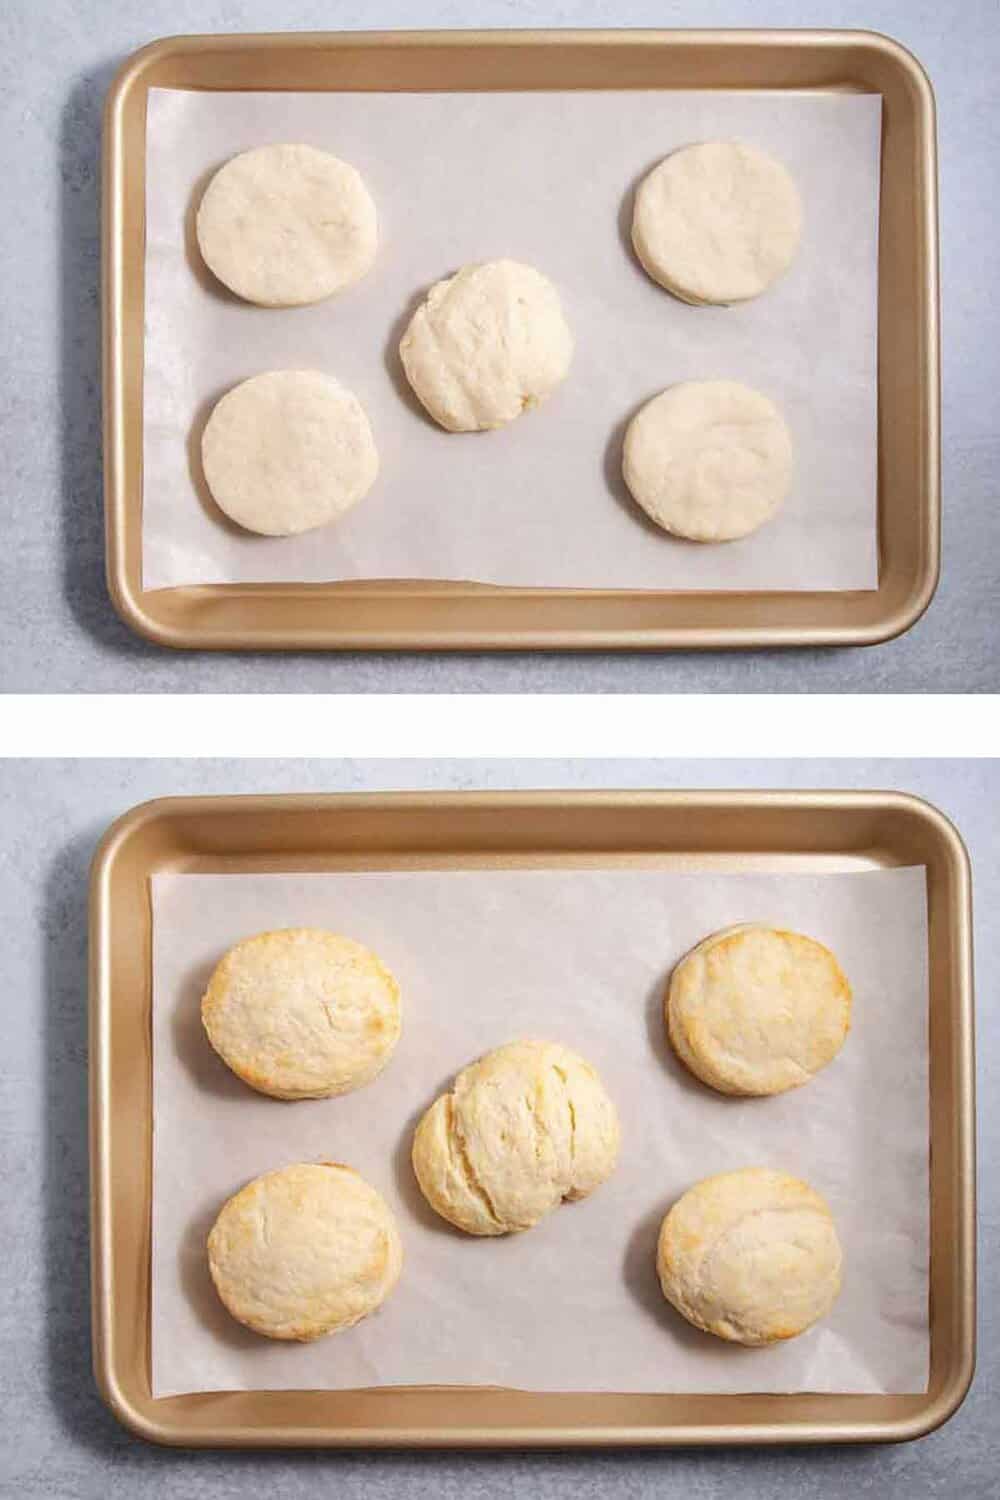 biscuit dough on pan and baked biscuits on pan